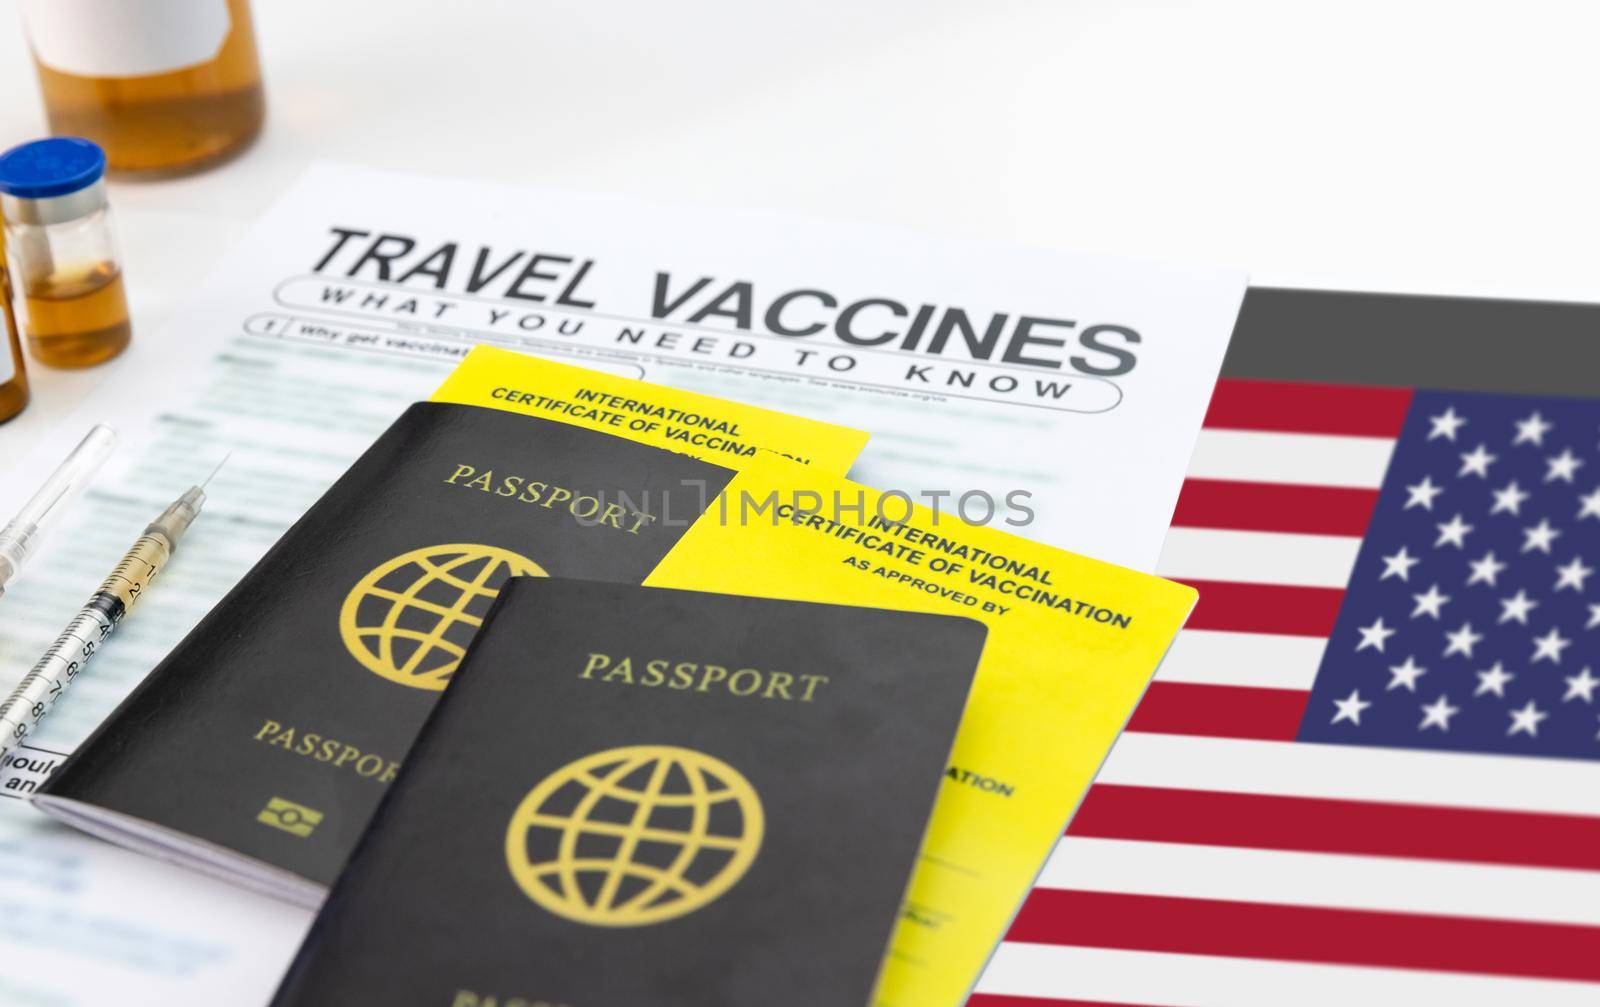 Get international certificate of the vaccination before travel by toa55